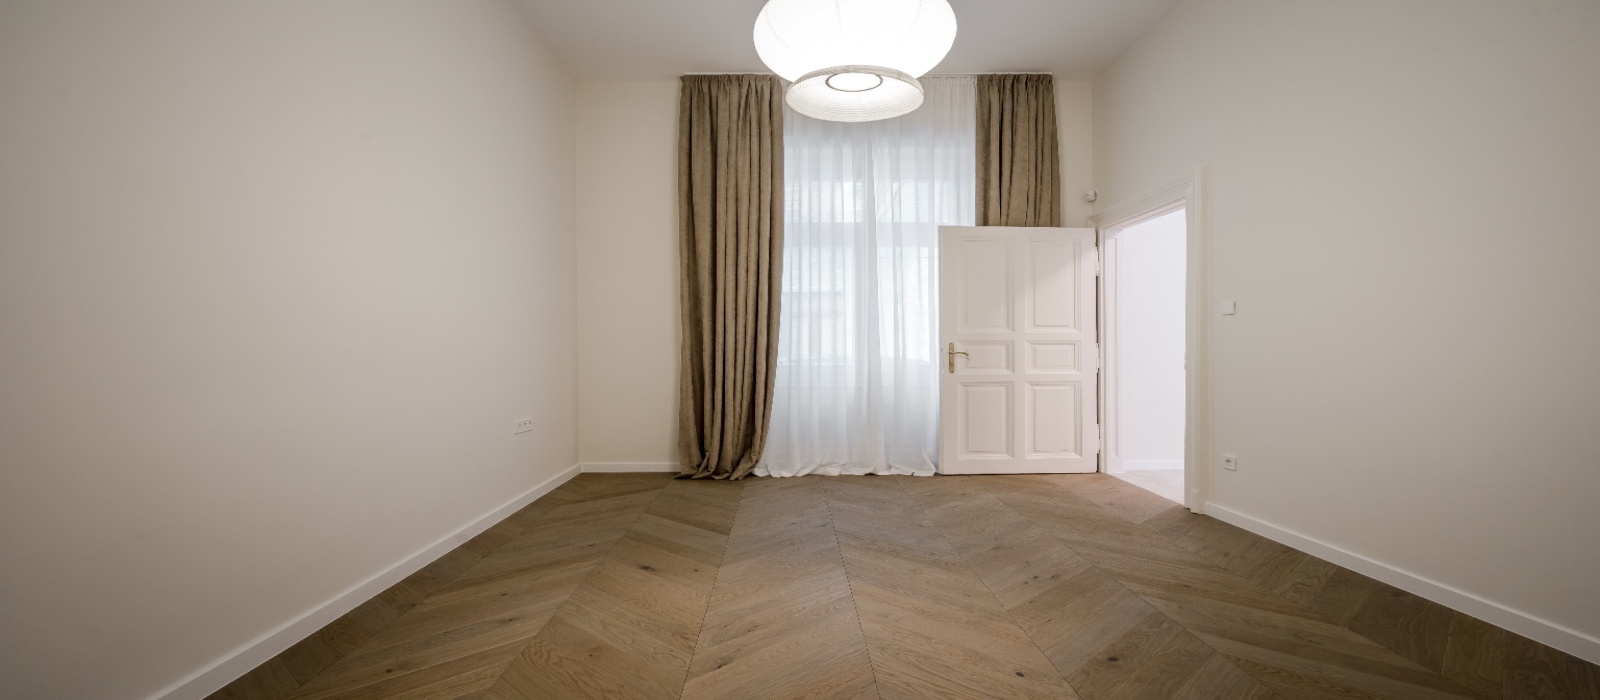 Hungary, ,Apartment,For sale,1363